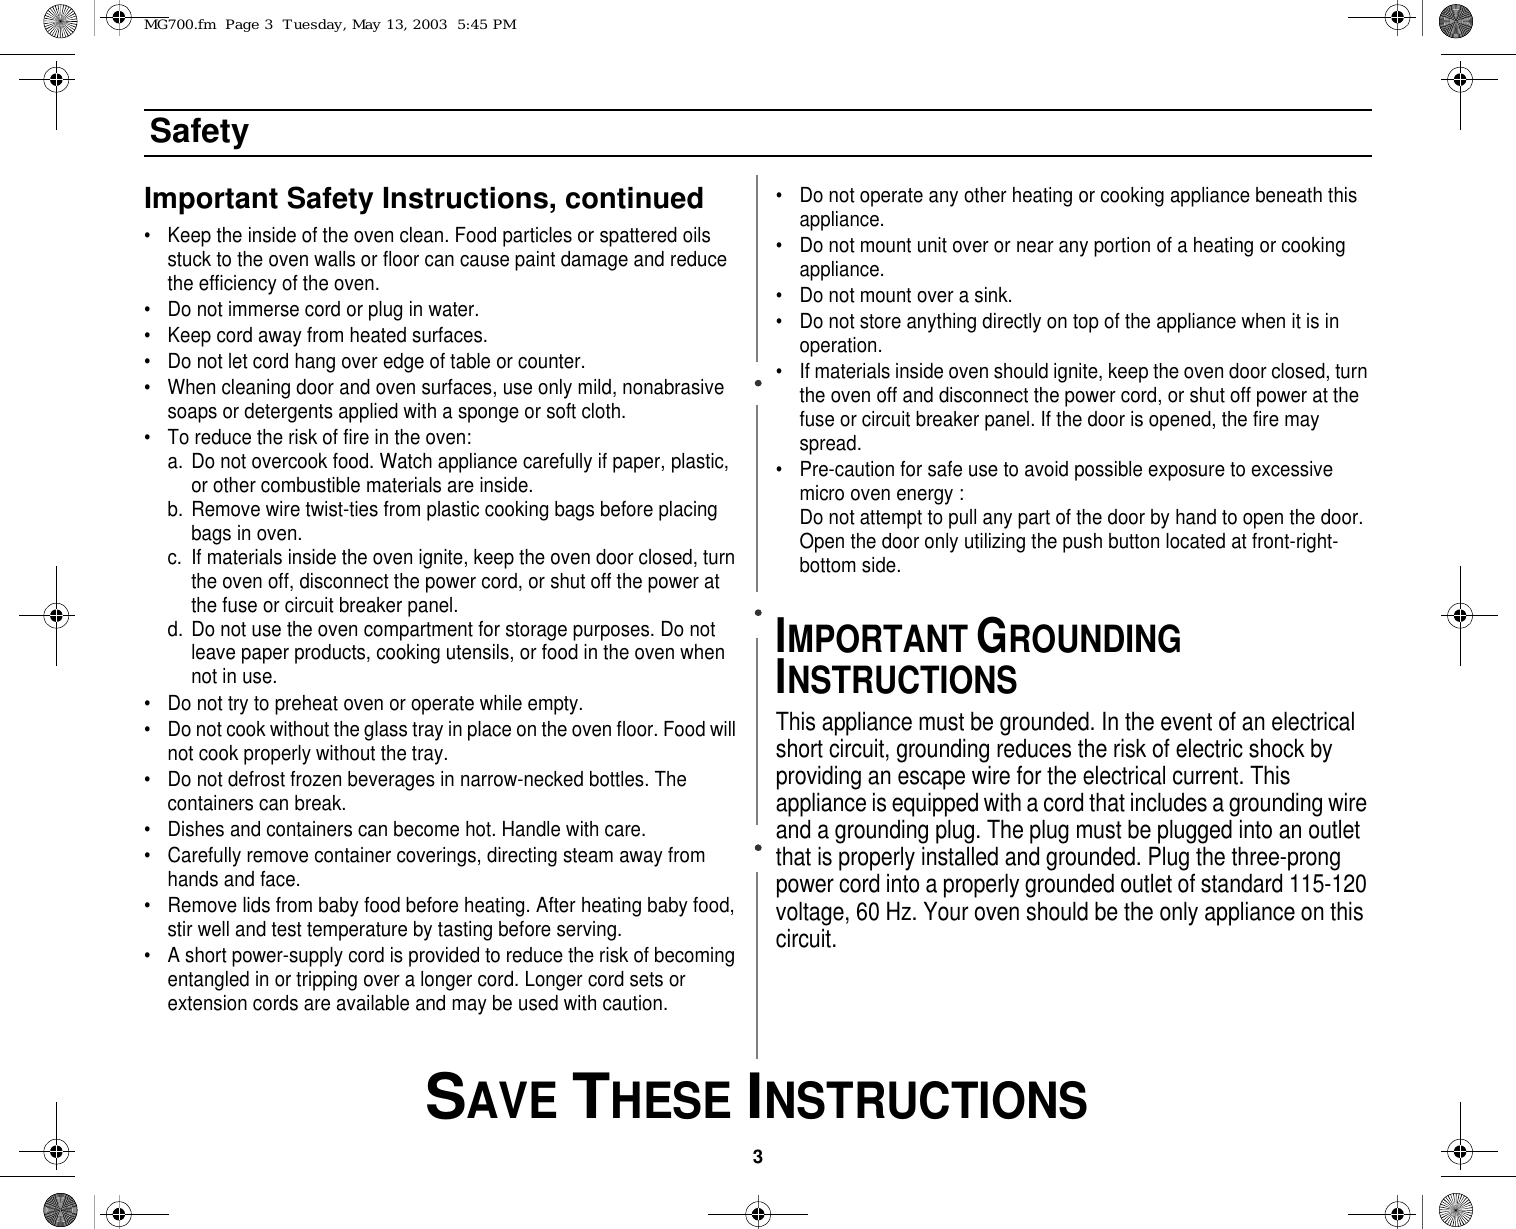 3 SAVE THESE INSTRUCTIONSSafetyImportant Safety Instructions, continued• Keep the inside of the oven clean. Food particles or spattered oils stuck to the oven walls or floor can cause paint damage and reduce the efficiency of the oven.• Do not immerse cord or plug in water.• Keep cord away from heated surfaces.• Do not let cord hang over edge of table or counter.• When cleaning door and oven surfaces, use only mild, nonabrasive soaps or detergents applied with a sponge or soft cloth.• To reduce the risk of fire in the oven:a. Do not overcook food. Watch appliance carefully if paper, plastic, or other combustible materials are inside.b. Remove wire twist-ties from plastic cooking bags before placing bags in oven.c. If materials inside the oven ignite, keep the oven door closed, turn the oven off, disconnect the power cord, or shut off the power at the fuse or circuit breaker panel.d. Do not use the oven compartment for storage purposes. Do not leave paper products, cooking utensils, or food in the oven when not in use.• Do not try to preheat oven or operate while empty.• Do not cook without the glass tray in place on the oven floor. Food will not cook properly without the tray.• Do not defrost frozen beverages in narrow-necked bottles. The containers can break.• Dishes and containers can become hot. Handle with care.• Carefully remove container coverings, directing steam away from hands and face.• Remove lids from baby food before heating. After heating baby food, stir well and test temperature by tasting before serving.• A short power-supply cord is provided to reduce the risk of becoming entangled in or tripping over a longer cord. Longer cord sets or extension cords are available and may be used with caution. • Do not operate any other heating or cooking appliance beneath this appliance.• Do not mount unit over or near any portion of a heating or cooking appliance.• Do not mount over a sink.• Do not store anything directly on top of the appliance when it is in operation.• If materials inside oven should ignite, keep the oven door closed, turn the oven off and disconnect the power cord, or shut off power at the fuse or circuit breaker panel. If the door is opened, the fire may spread.• Pre-caution for safe use to avoid possible exposure to excessive micro oven energy :Do not attempt to pull any part of the door by hand to open the door. Open the door only utilizing the push button located at front-right-bottom side.IMPORTANT GROUNDING INSTRUCTIONSThis appliance must be grounded. In the event of an electrical short circuit, grounding reduces the risk of electric shock by providing an escape wire for the electrical current. This appliance is equipped with a cord that includes a grounding wire and a grounding plug. The plug must be plugged into an outlet that is properly installed and grounded. Plug the three-prong power cord into a properly grounded outlet of standard 115-120 voltage, 60 Hz. Your oven should be the only appliance on this circuit.MG700.fm  Page 3  Tuesday, May 13, 2003  5:45 PM